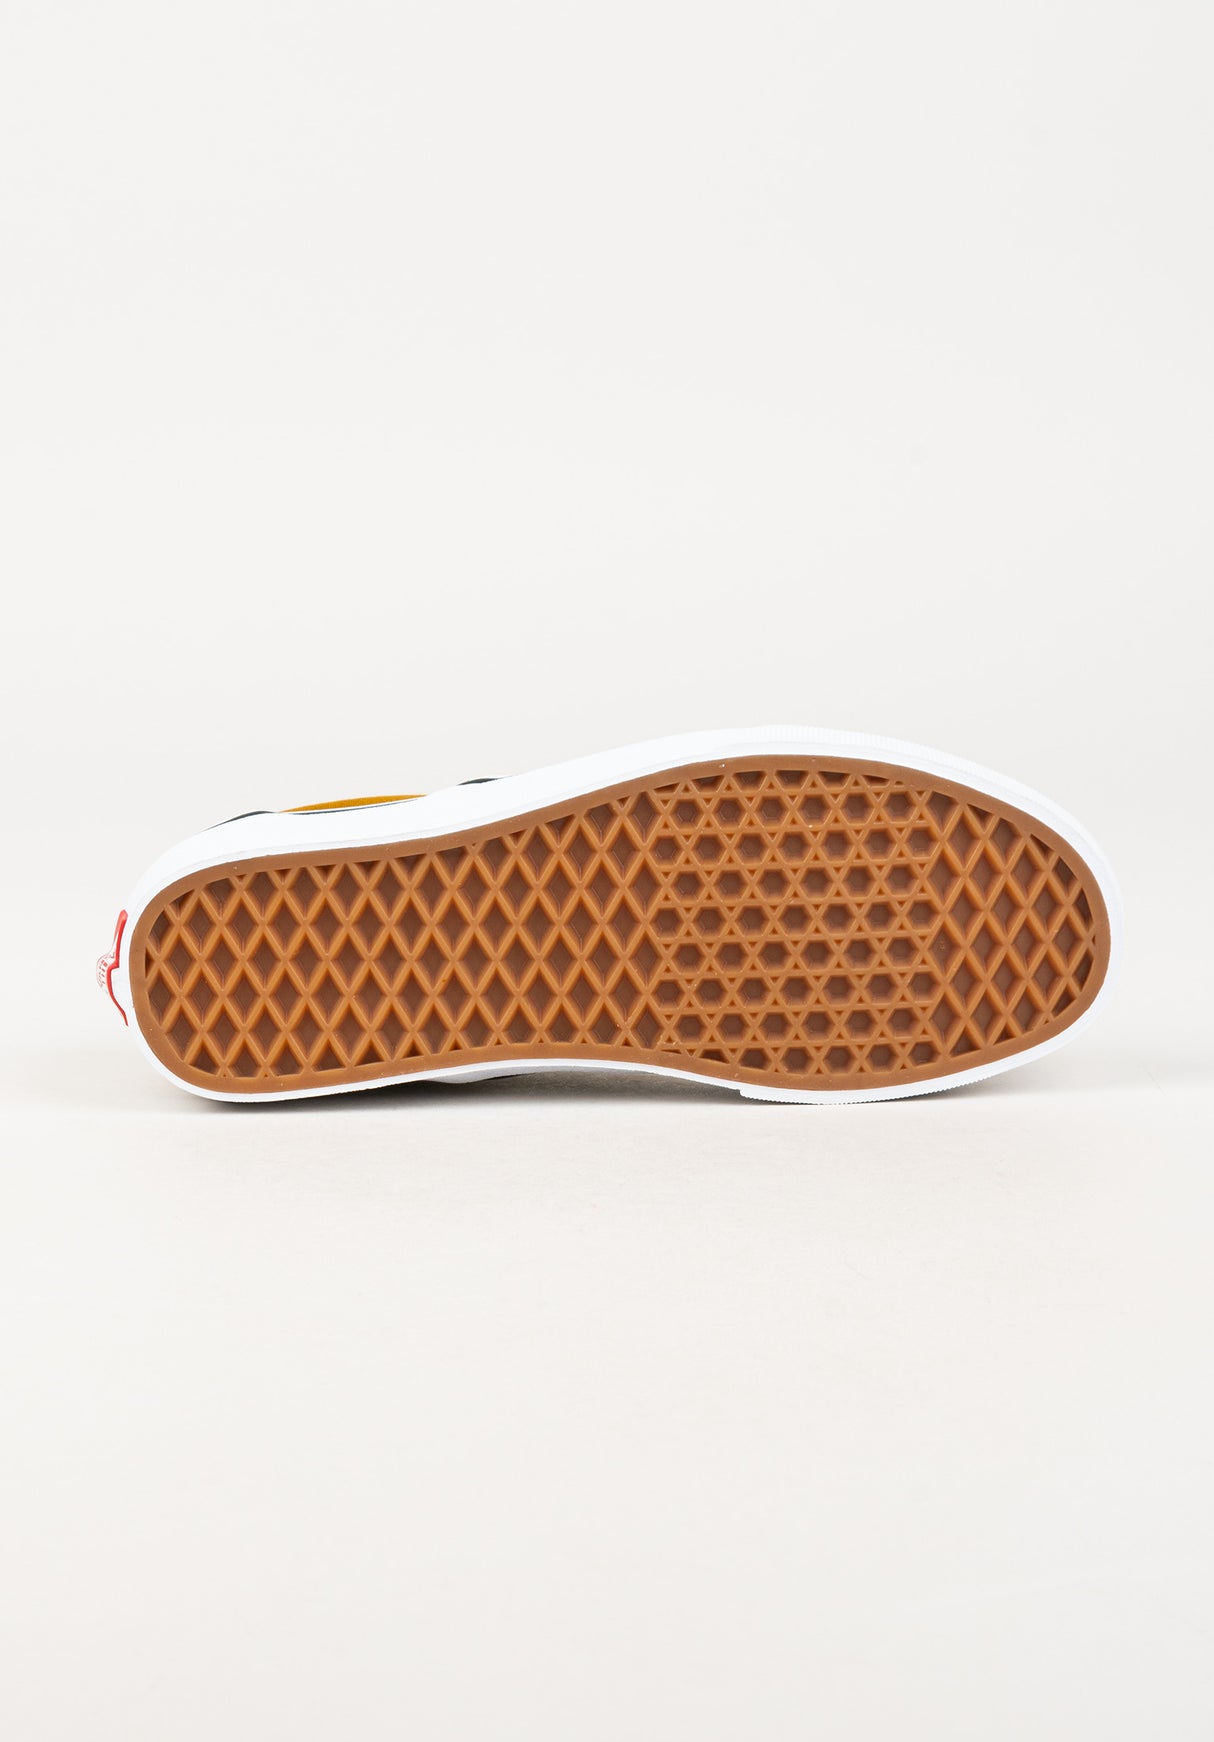 Slip-On colortheory-checkerboard-goldenbrown Close-Up1